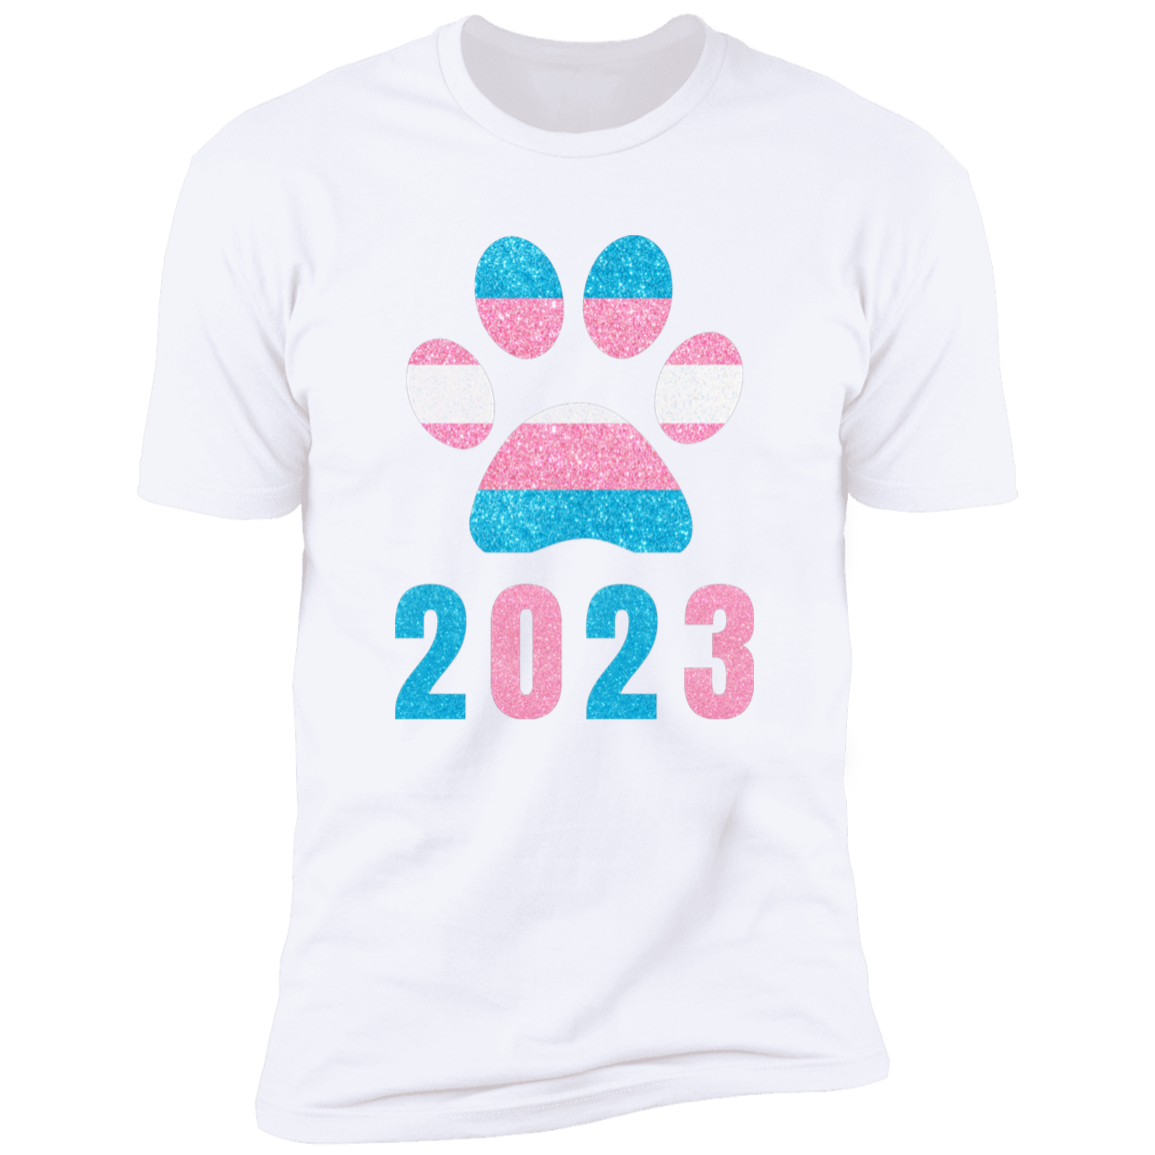 Dog Paw Trans Pride 2023 t-shirt, dog trans pride dog shirt for humans, in white